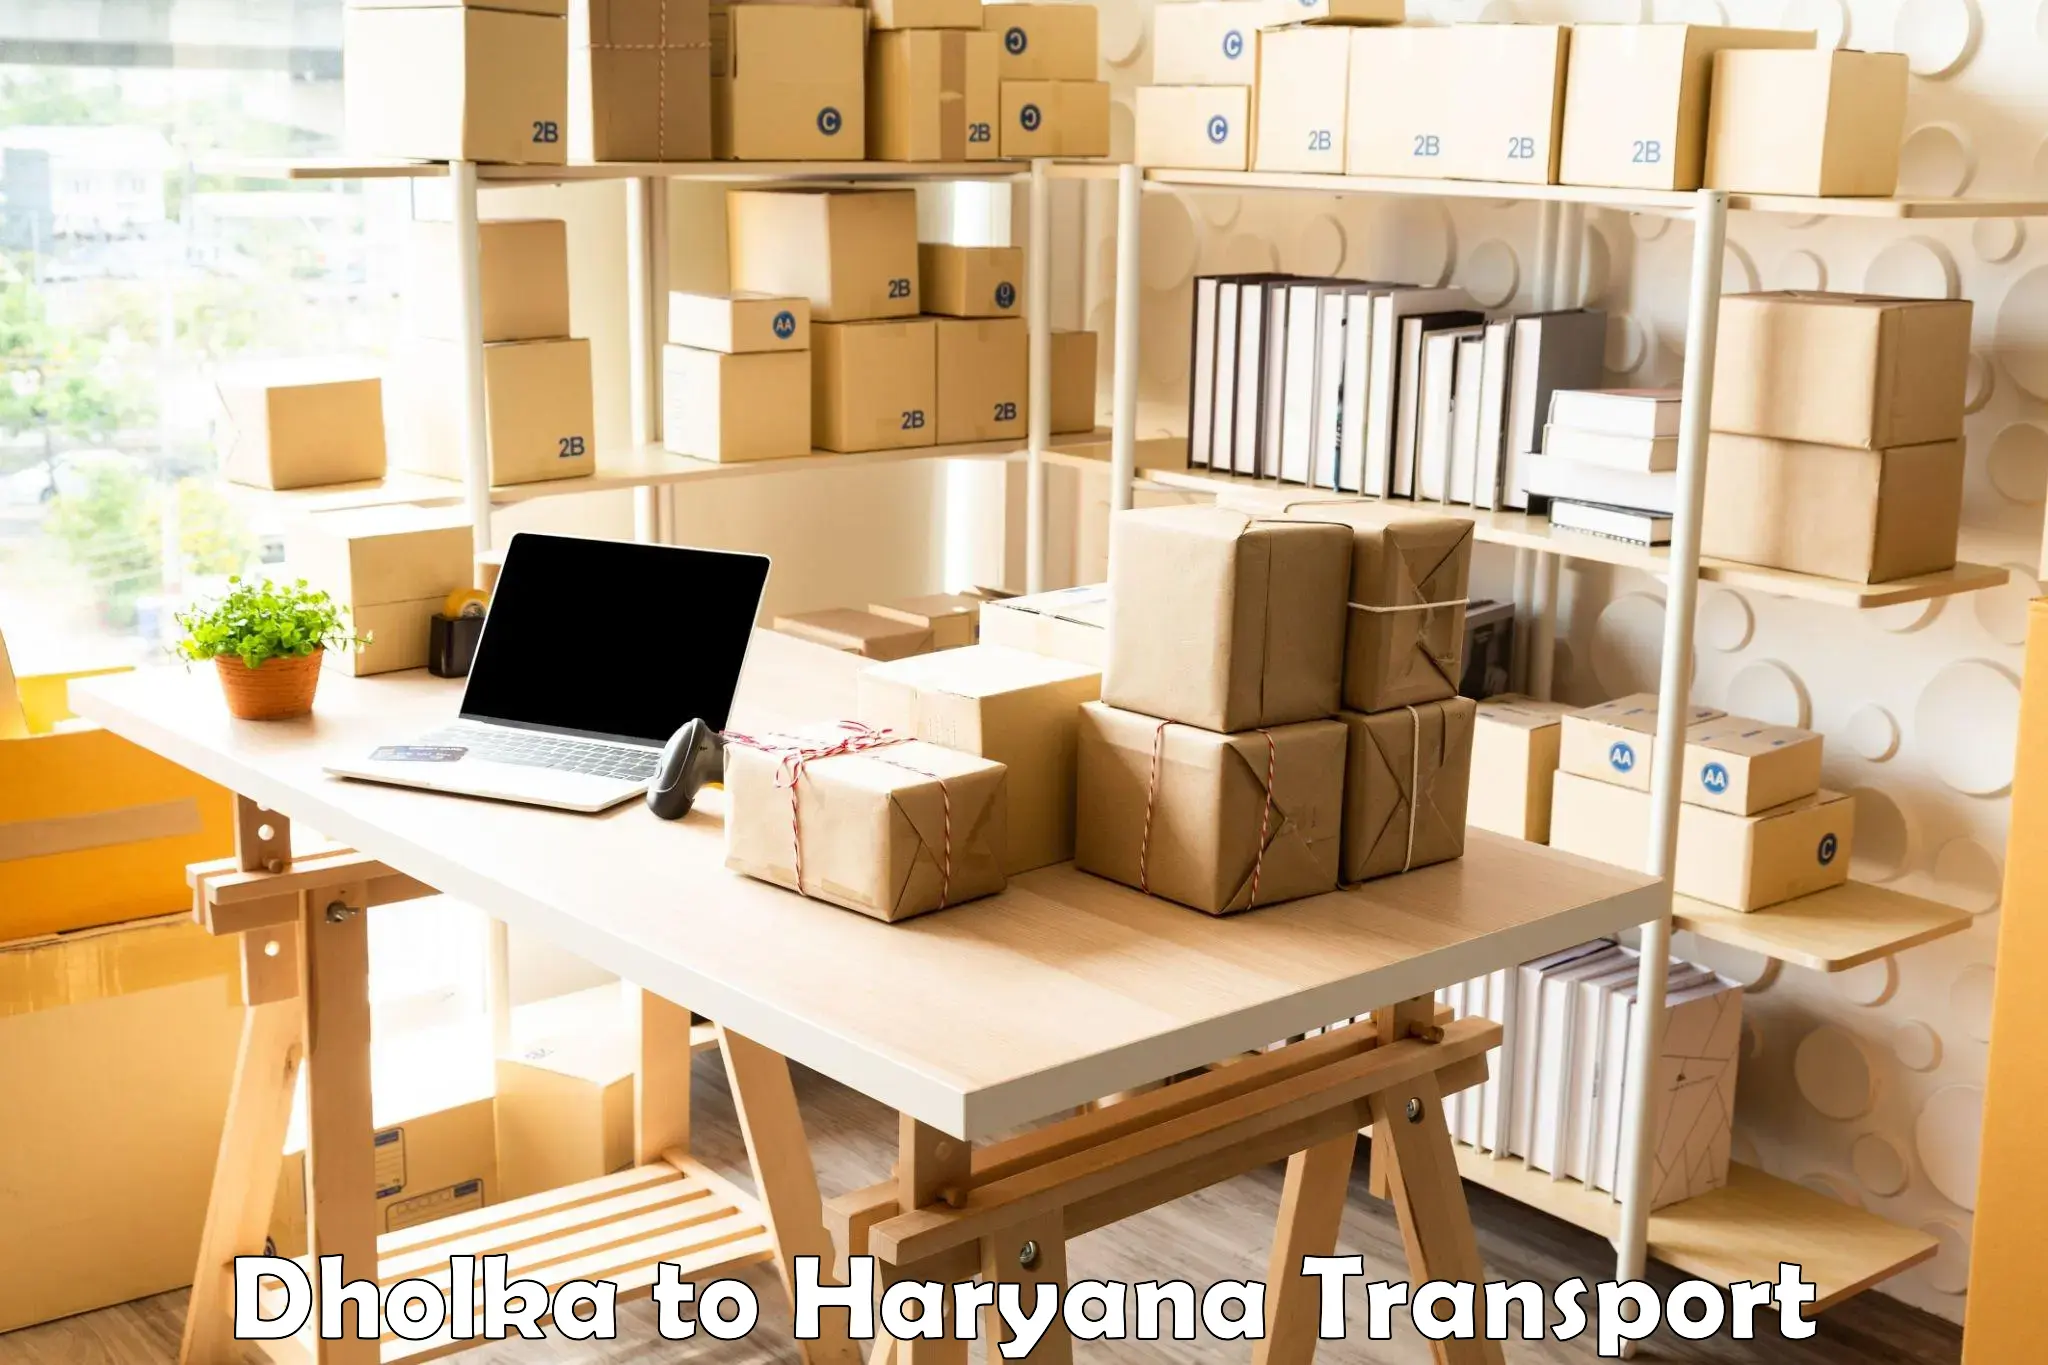 Nationwide transport services Dholka to NCR Haryana